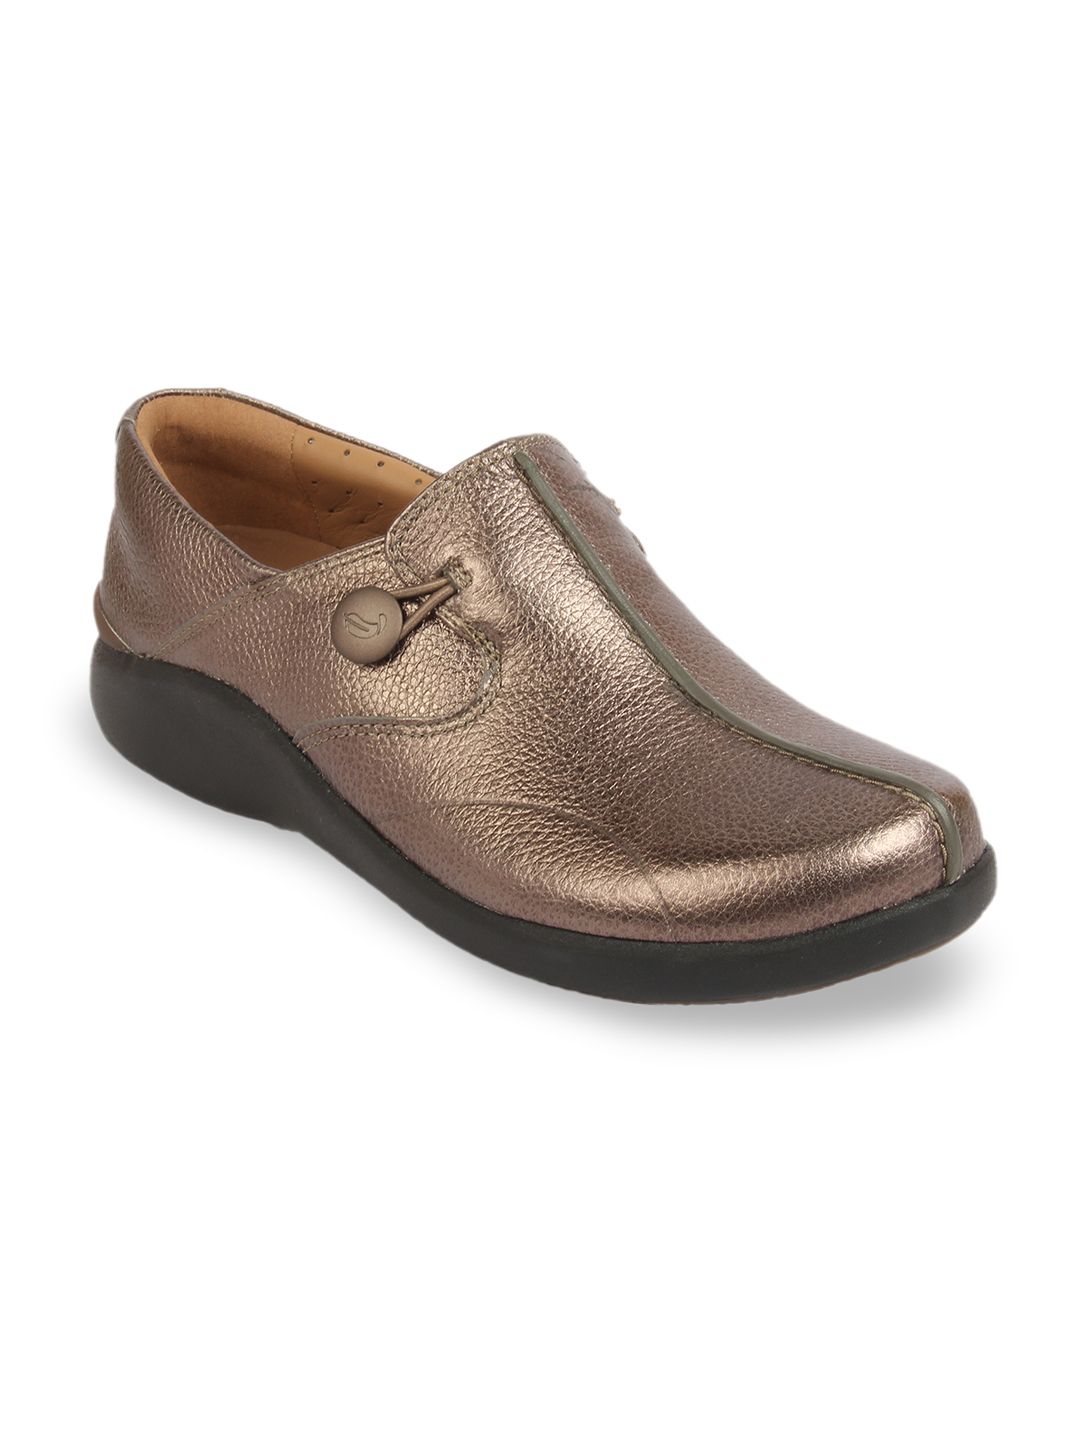 Clarks Women Copper-Toned Leather Slip-On Sneakers Price in India